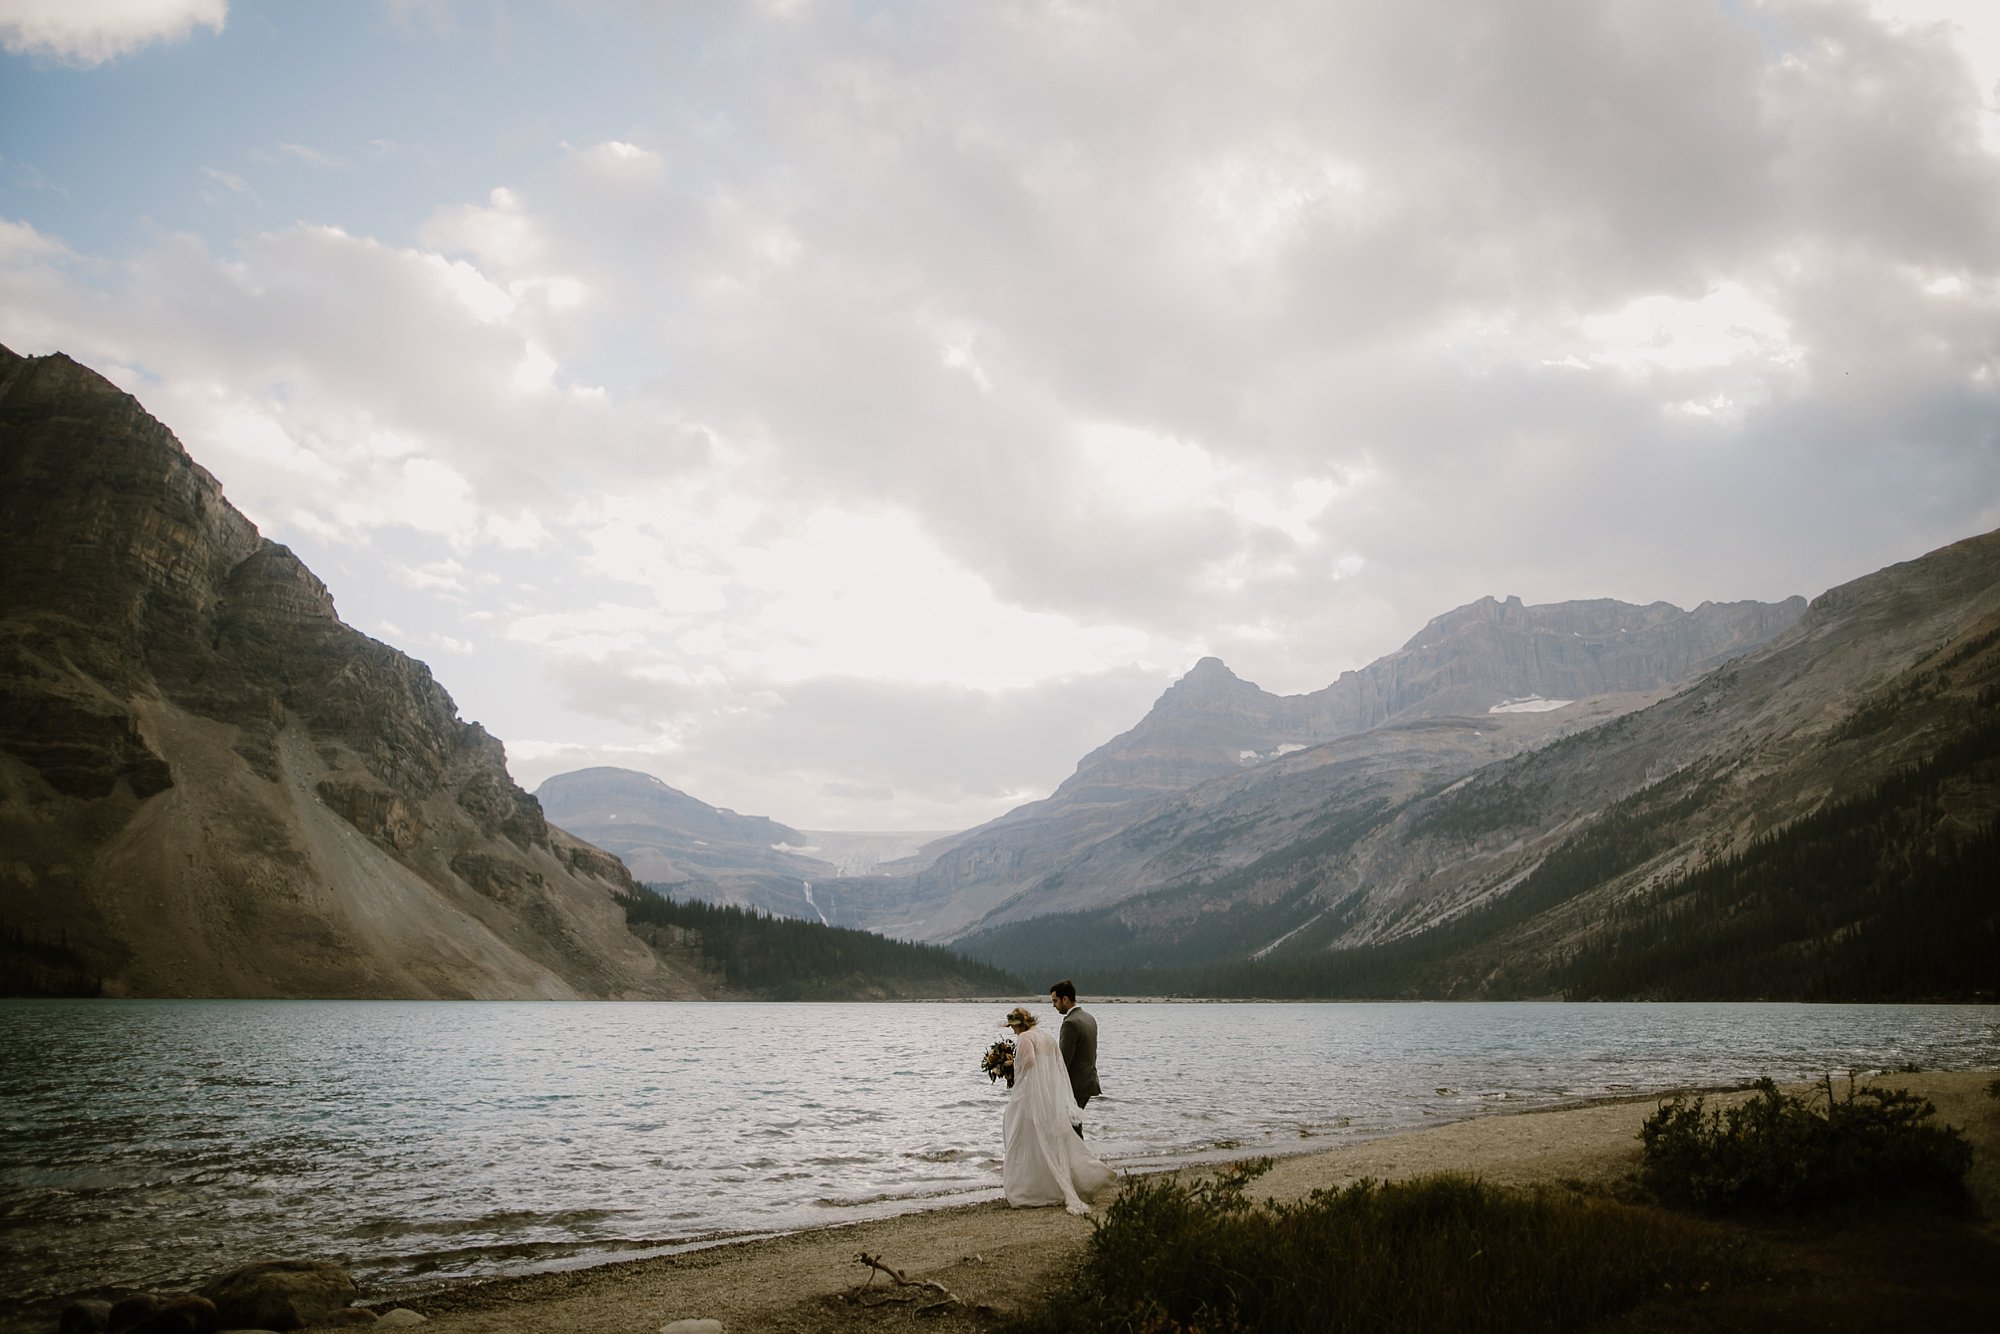 A wedding photo at Bow Lake in Canada